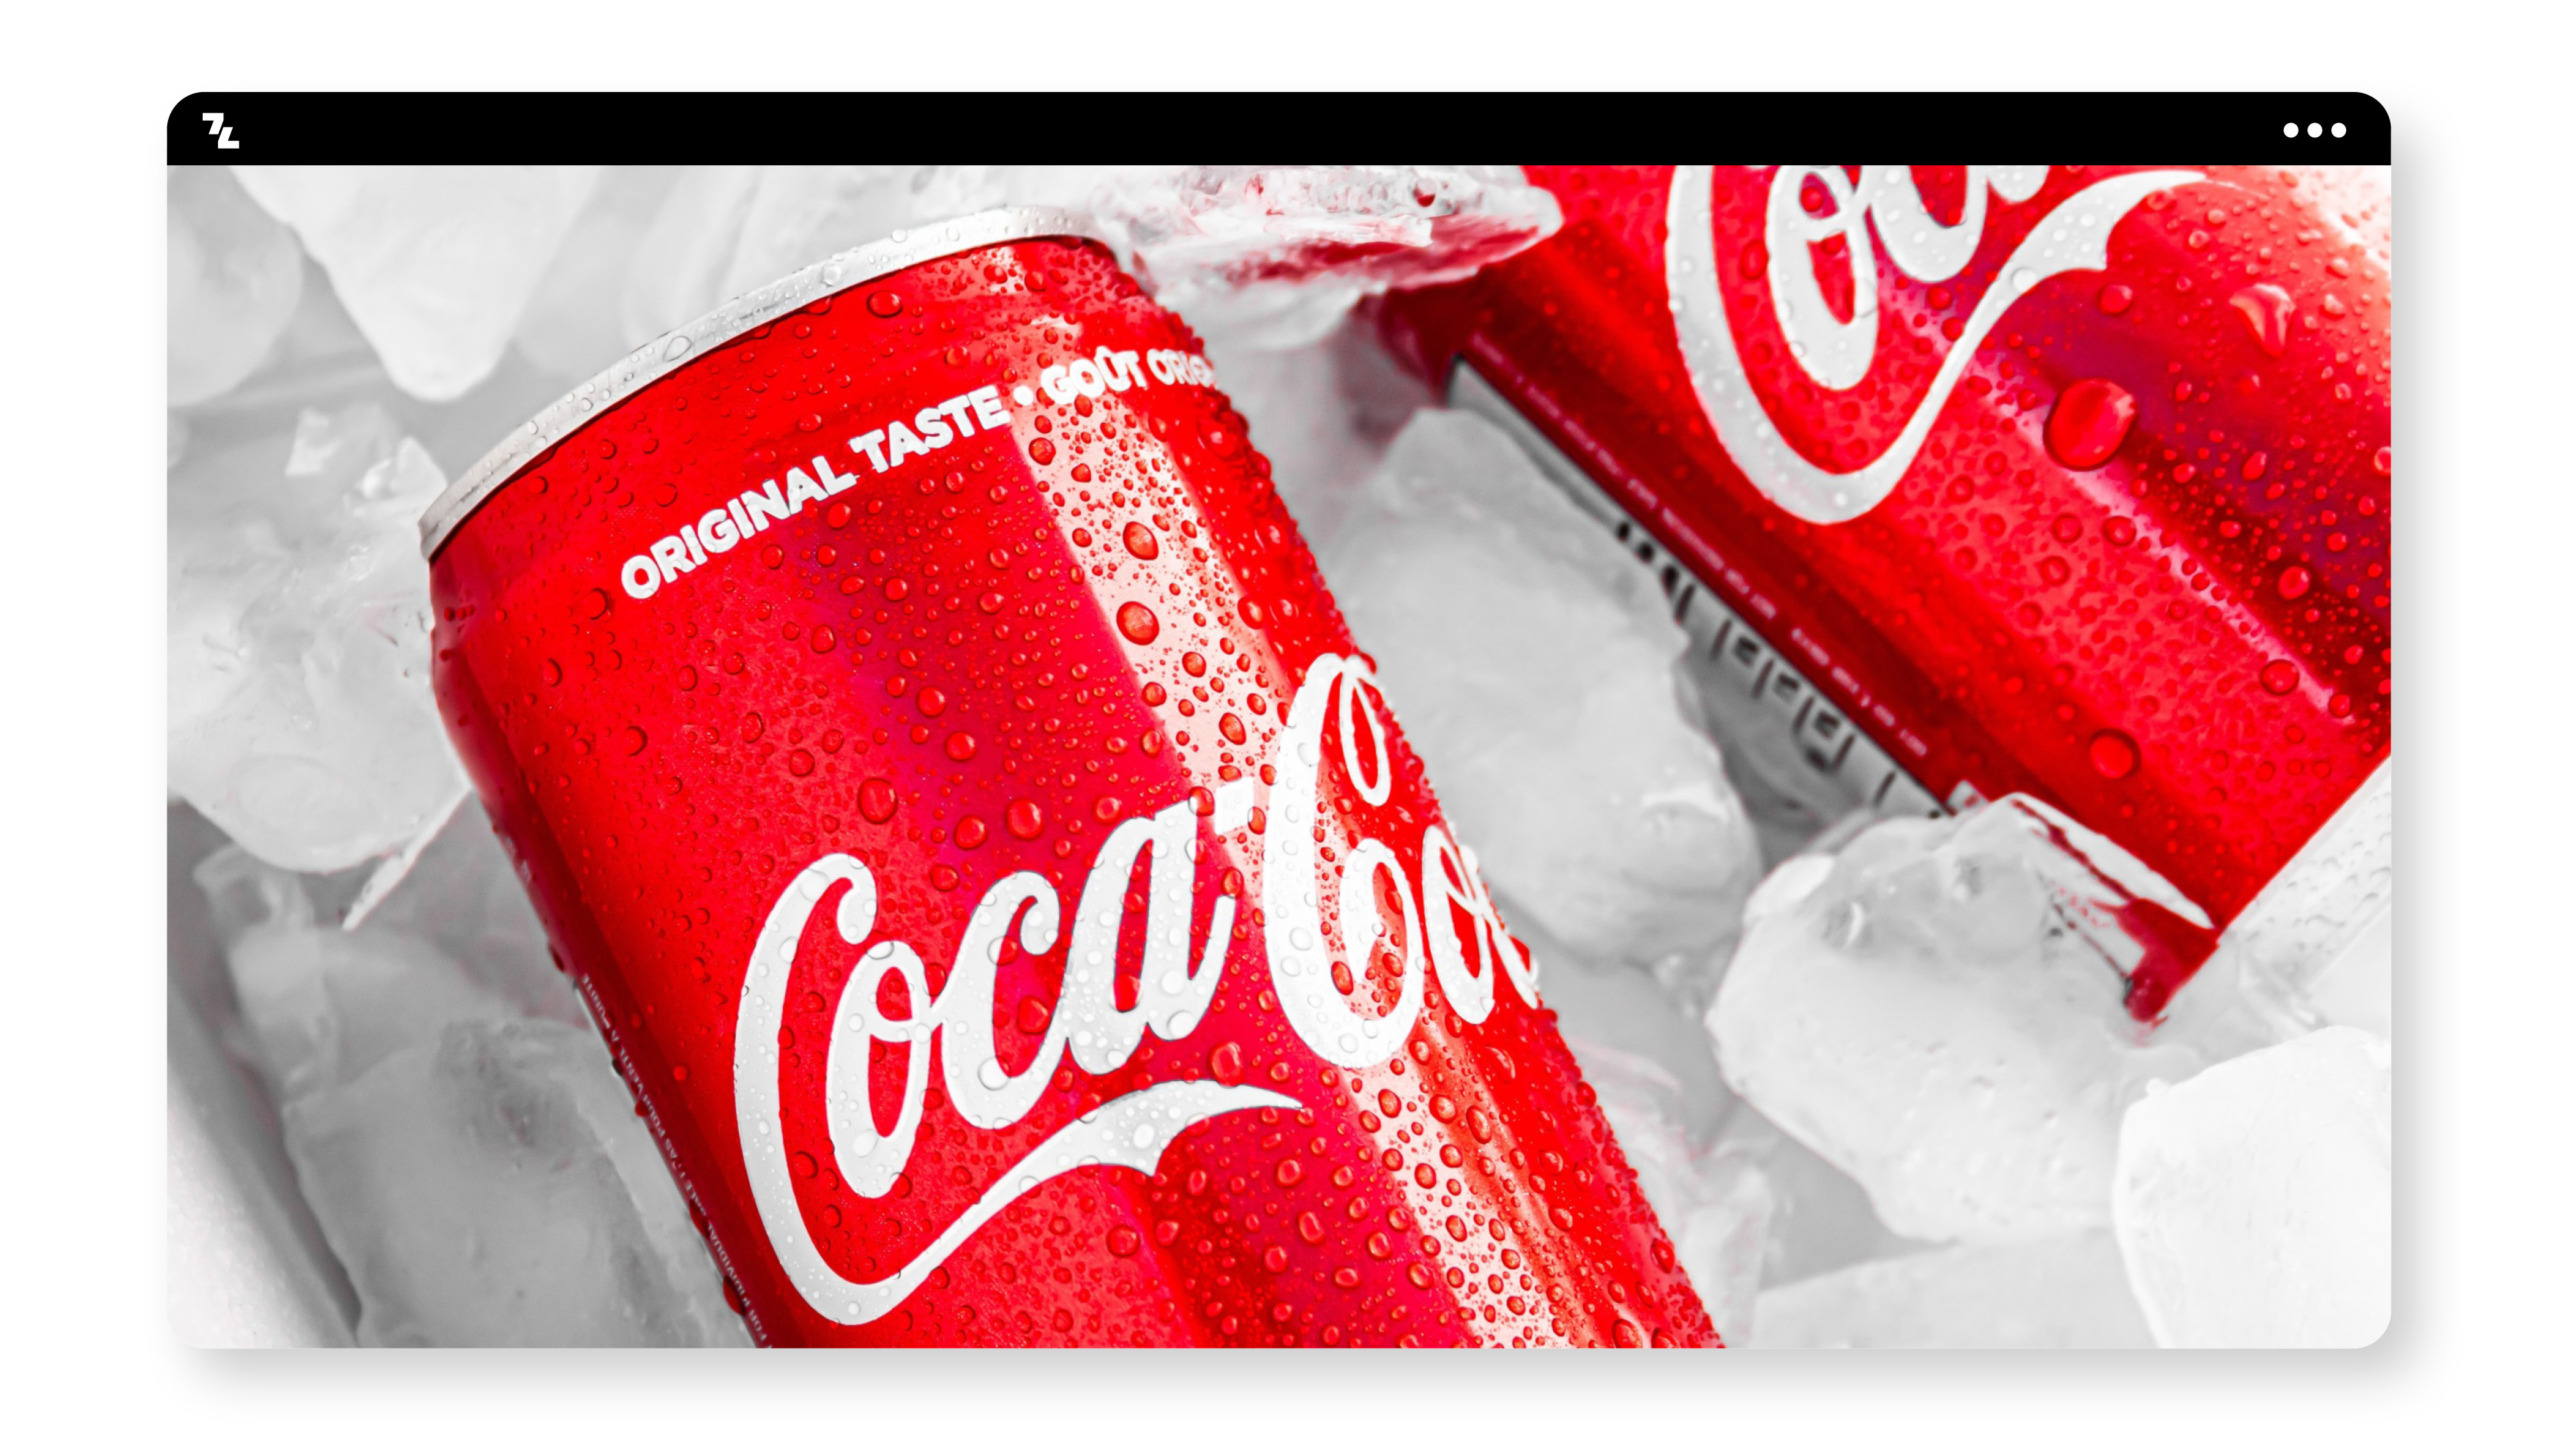 Two cans of Coca Cola sitting on ice, protected from melting.